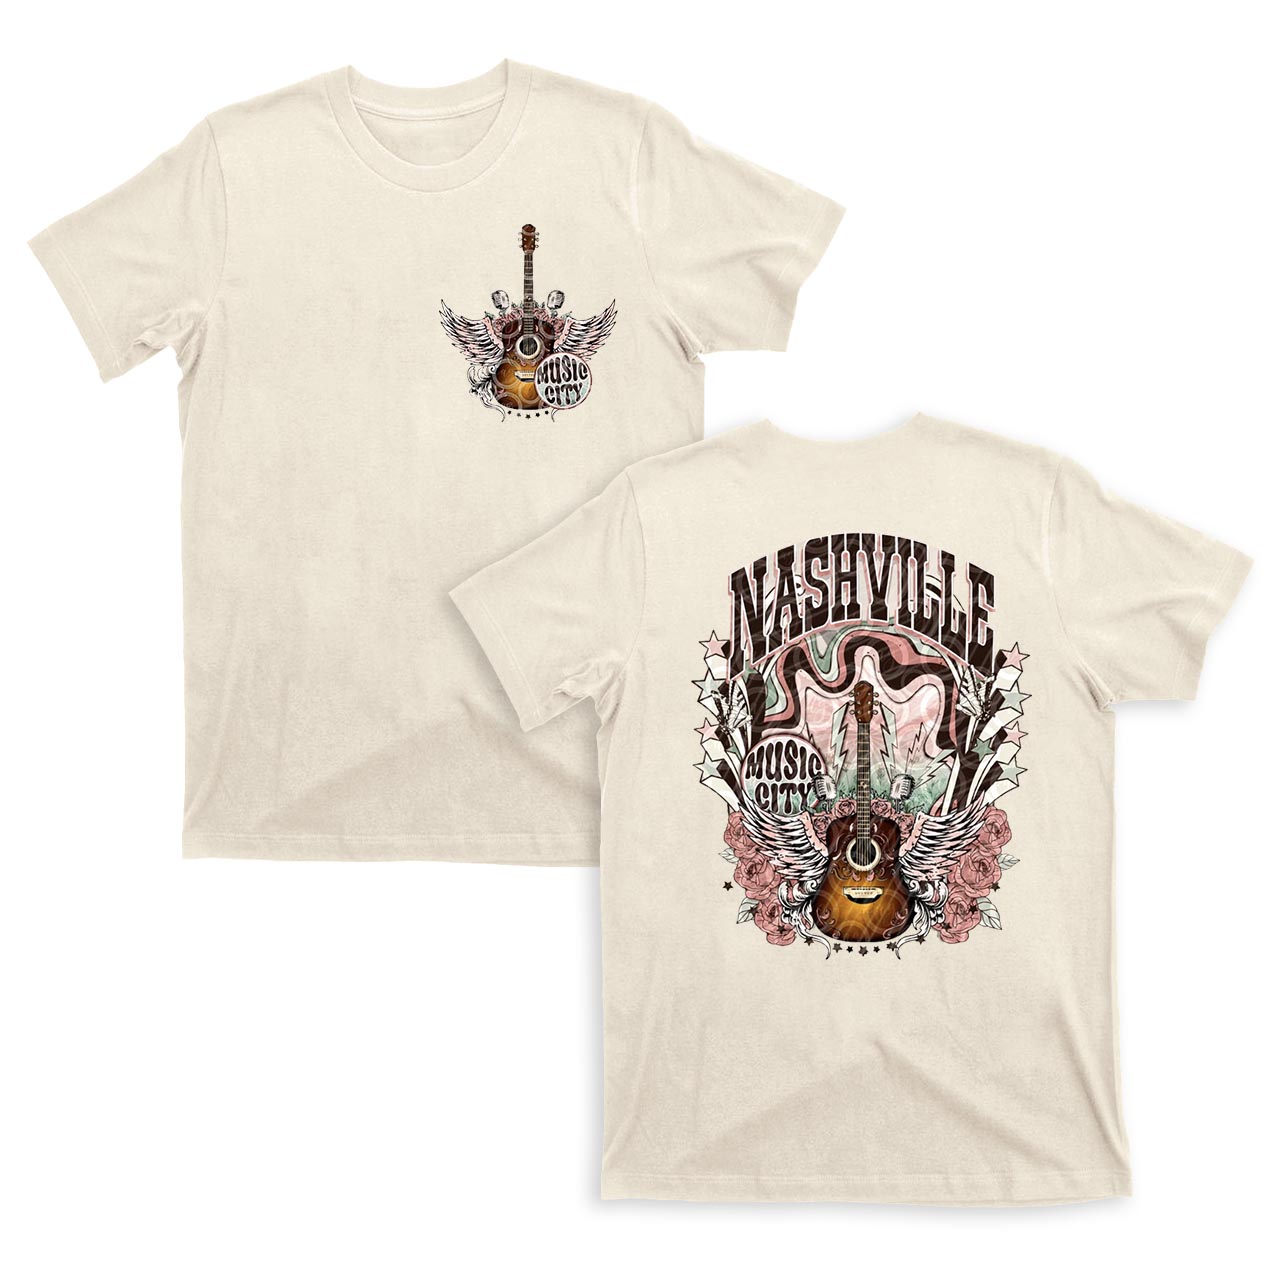 Western Nasville Music City Country Cowboy T-Shirts